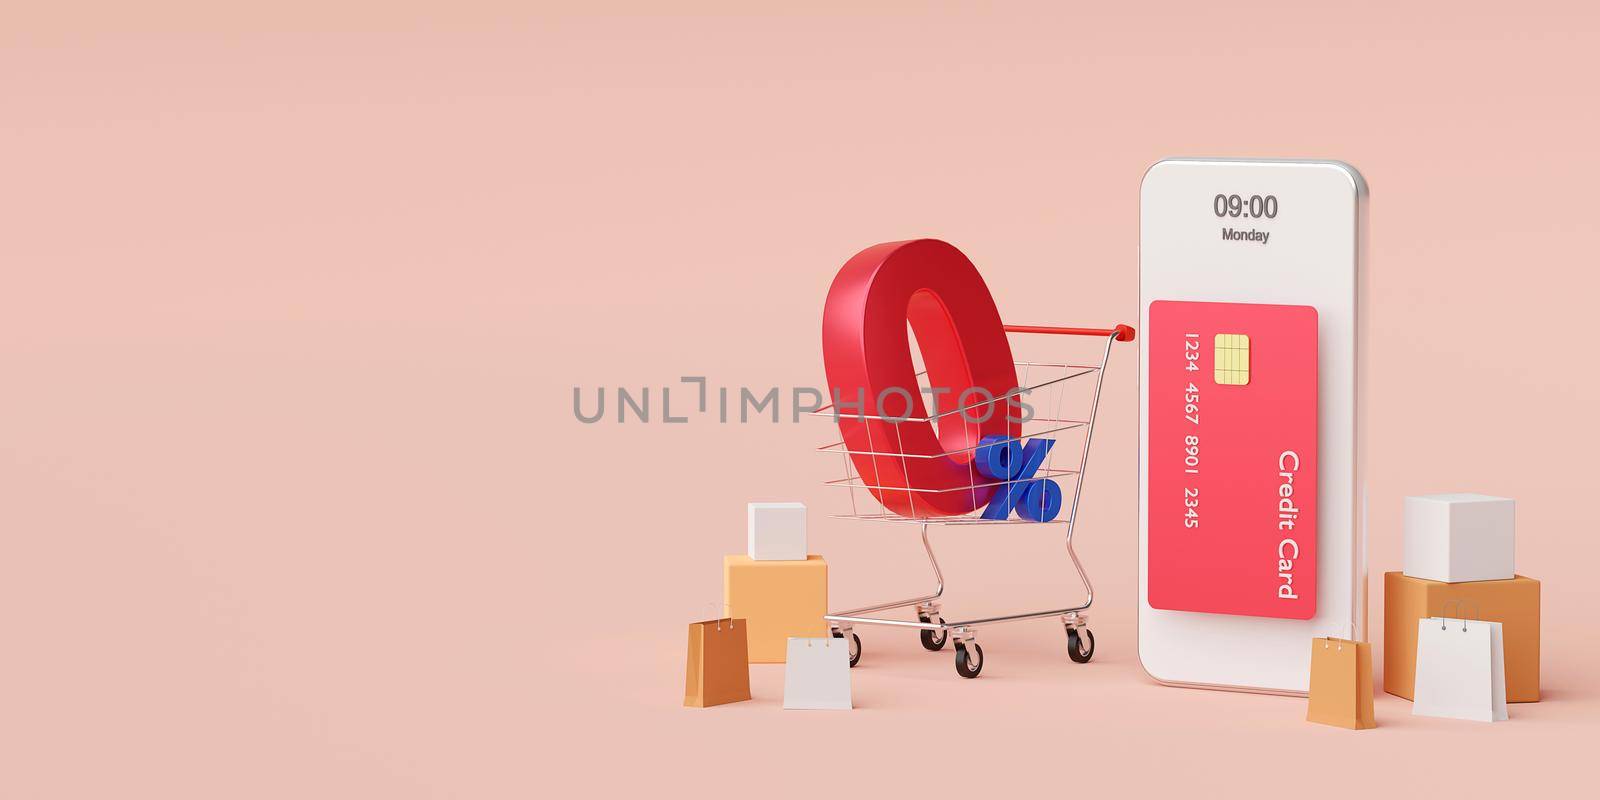 Shopping online on smartphone with special offer 0% interest installment payments, 3d illustration by nutzchotwarut